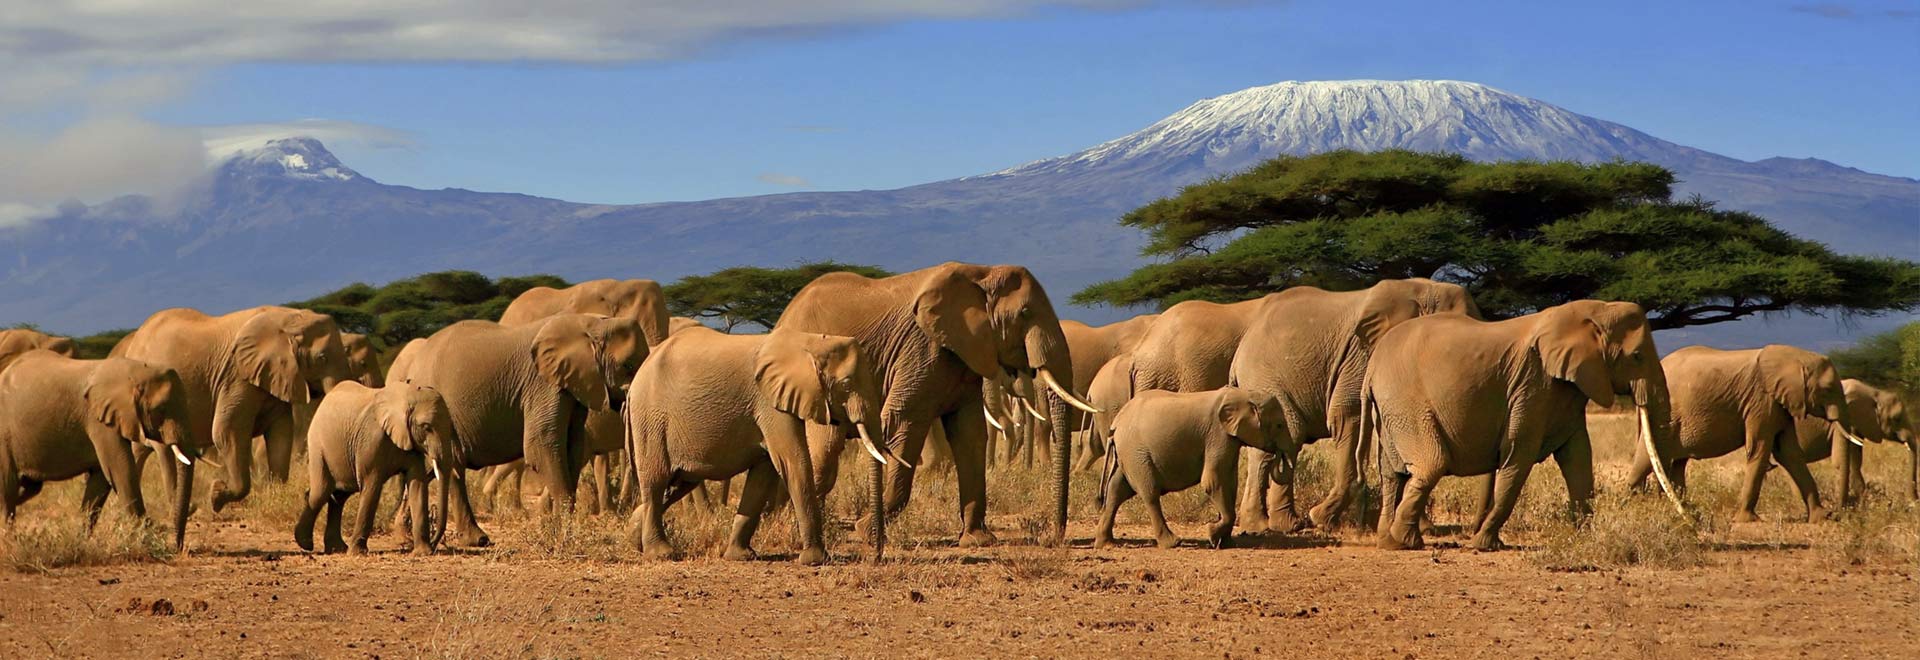 African safari: 8 best national parks to view wildlife